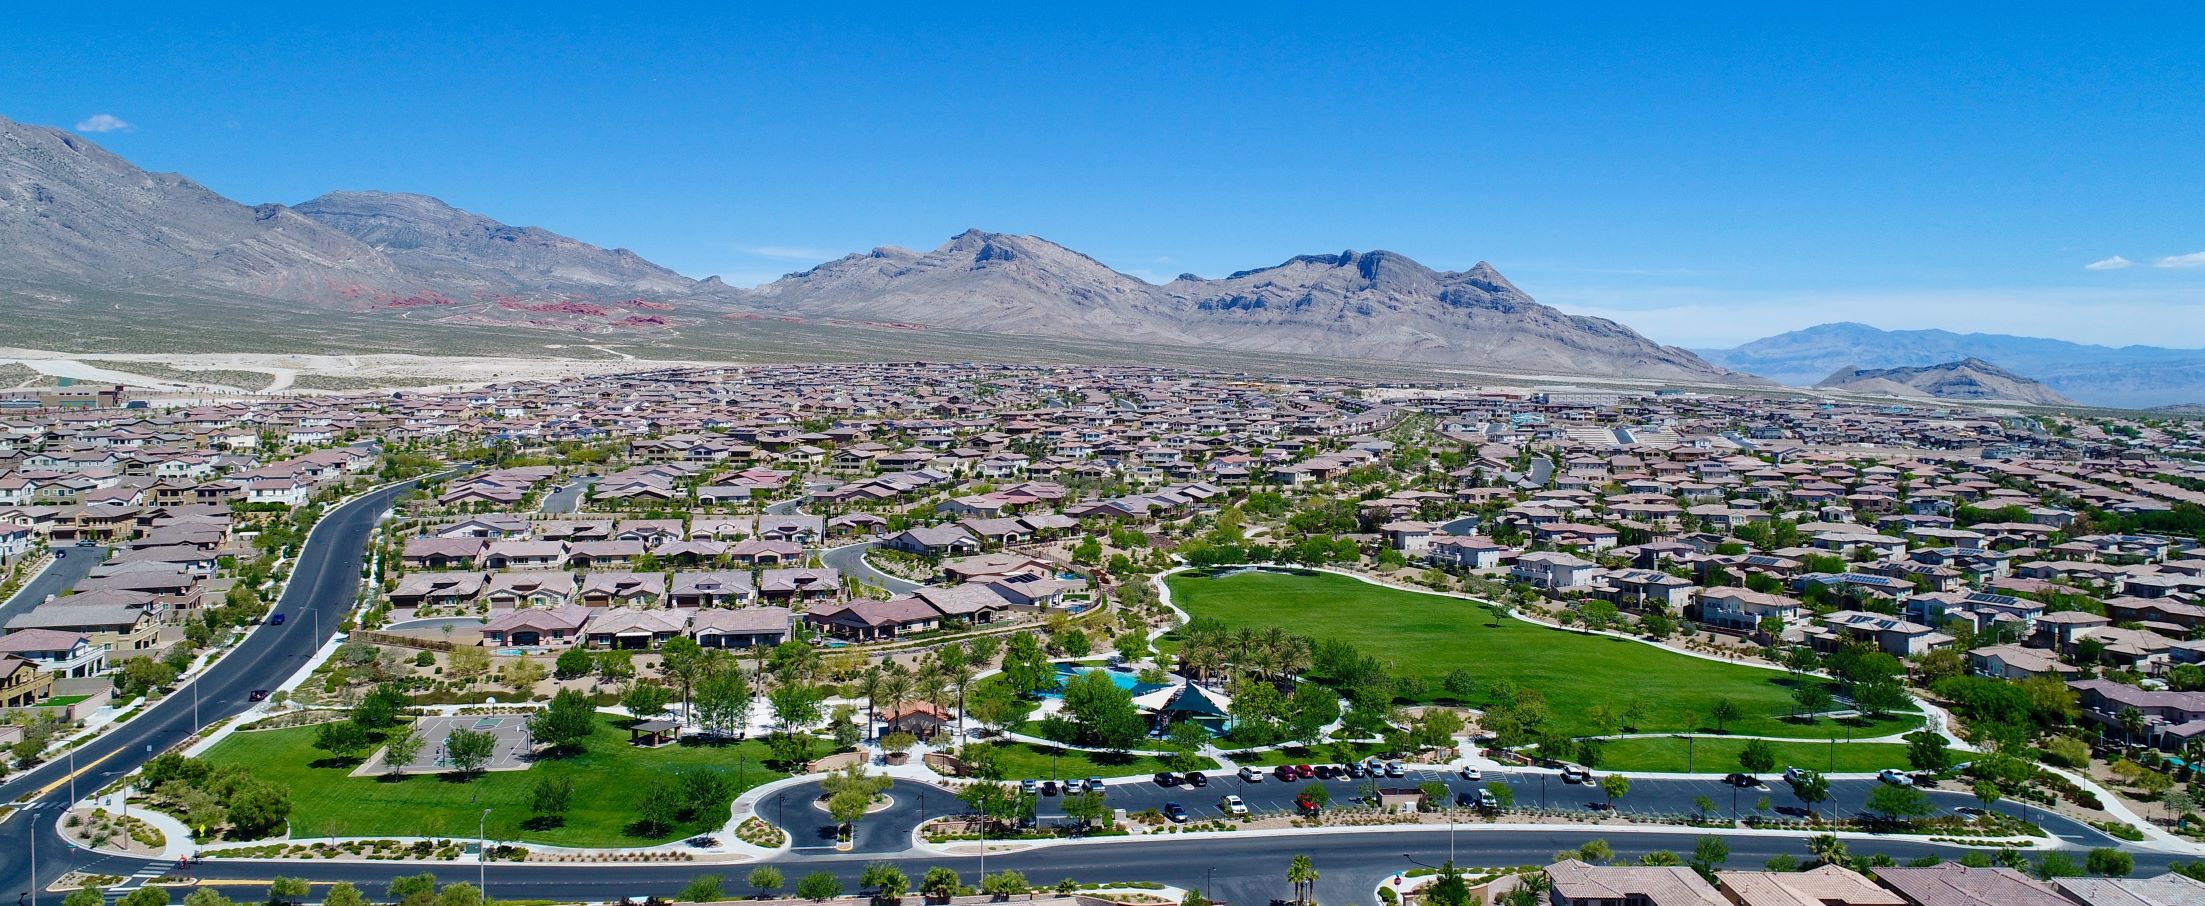 Taylor Morrison plans Ashland, a new Summerlin neighborhood with 92 single-family homes near Red Rock Canyon. Construction to start in early 2025. Stay updated with Smith Team Las Vegas. #SummerlinHomes #TaylorMorrison #RedRockCanyon